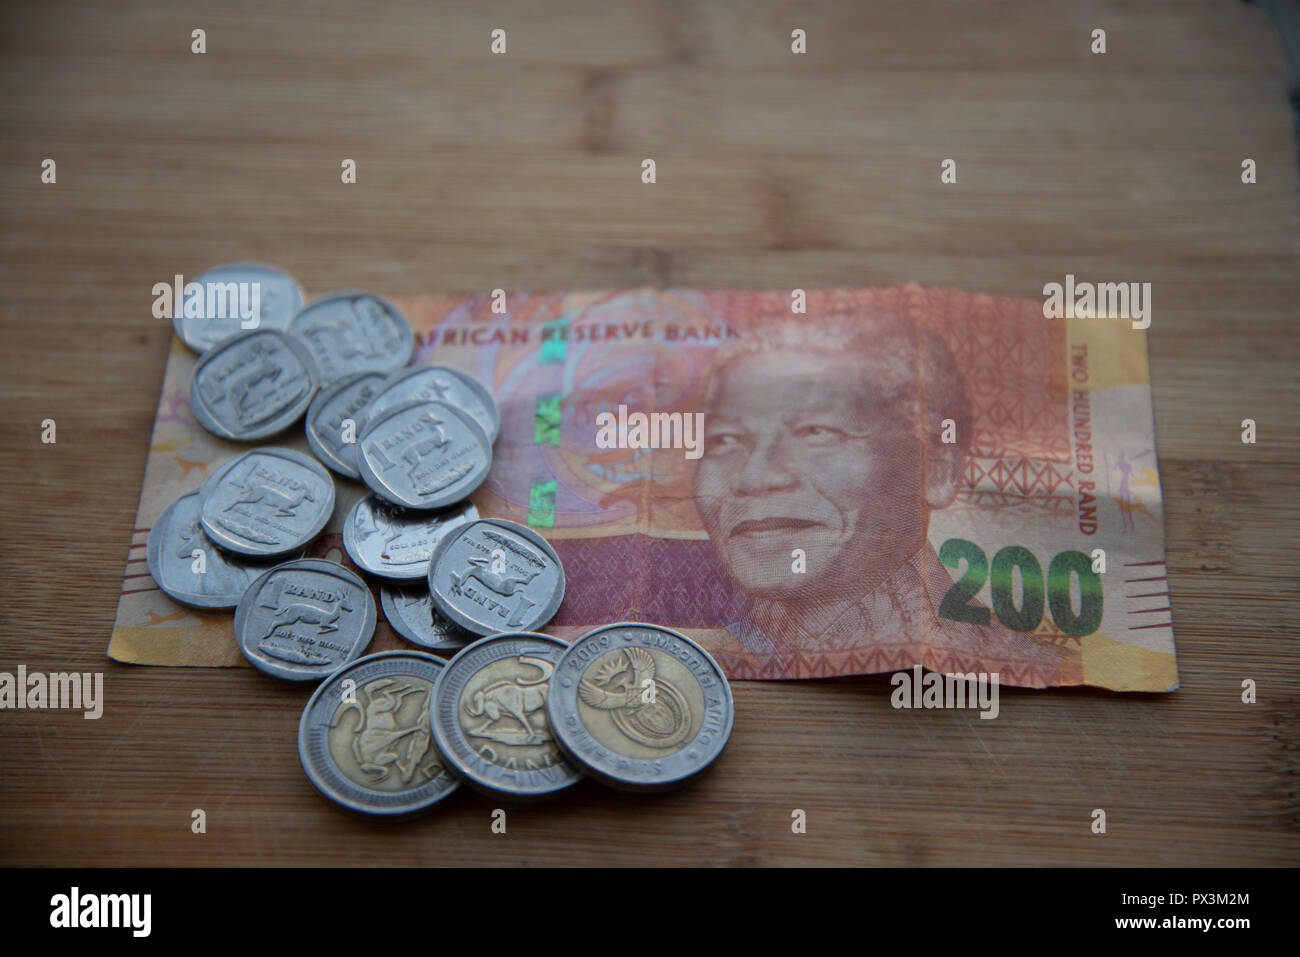 Johannesburg, South Africa, 19 October, 2018. The South African Rand re-gained some of its recent losses and headed into the weekend a little stronger. Credit: Eva-Lotta Jansson/Alamy Live News Stock Photo